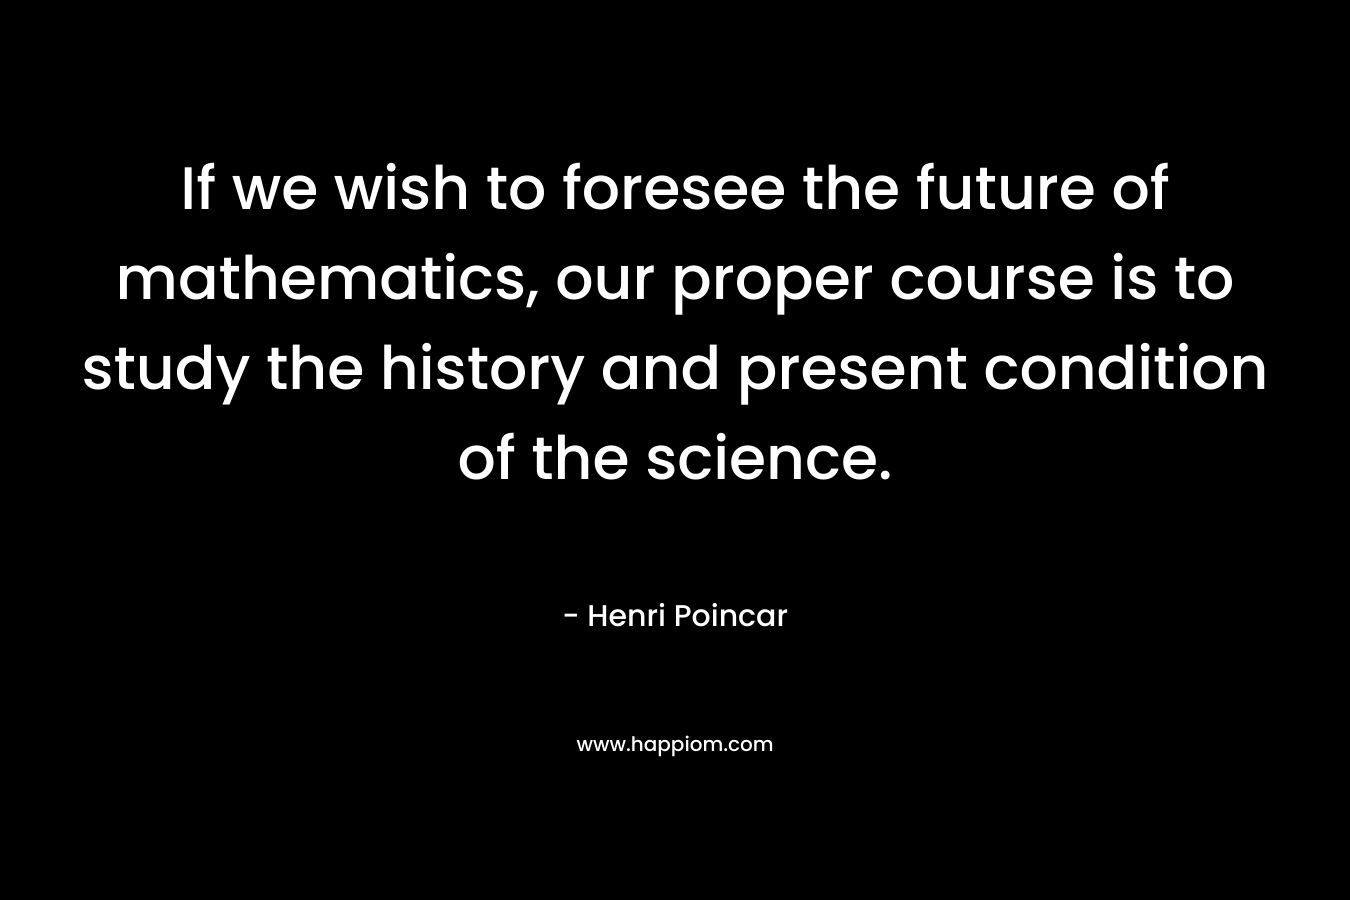 If we wish to foresee the future of mathematics, our proper course is to study the history and present condition of the science.